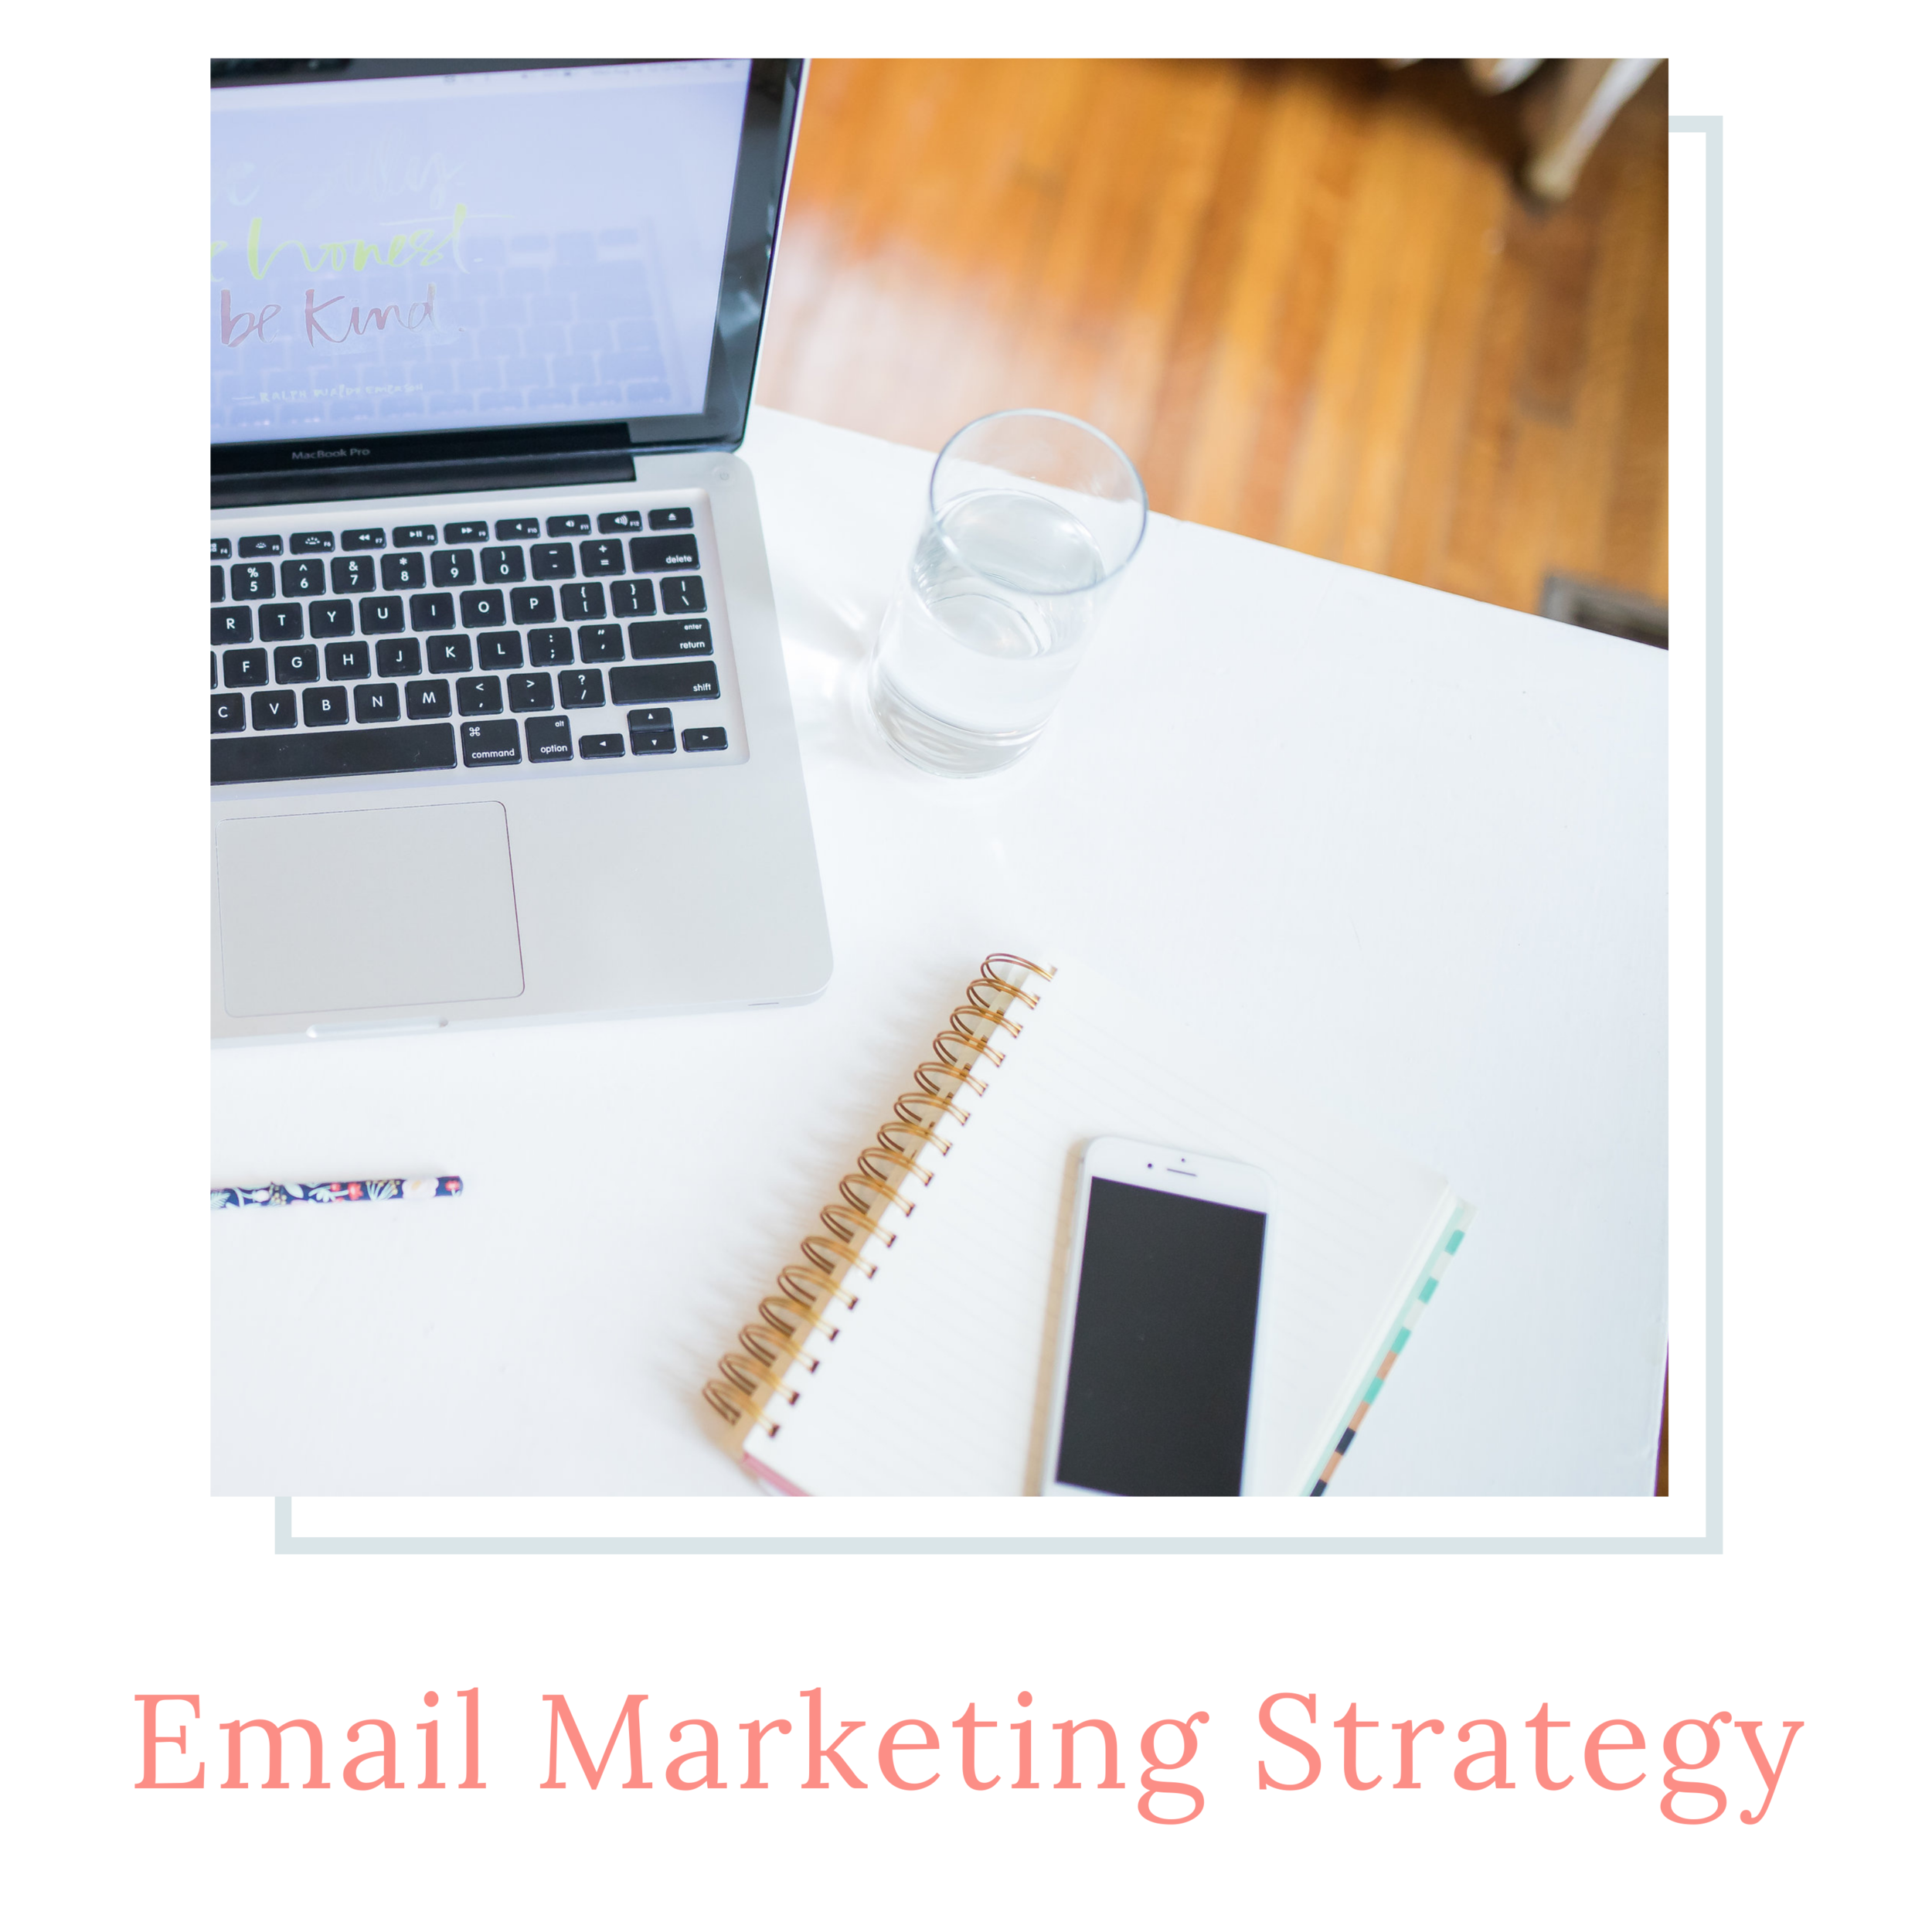 Email marketing strategy blog posts